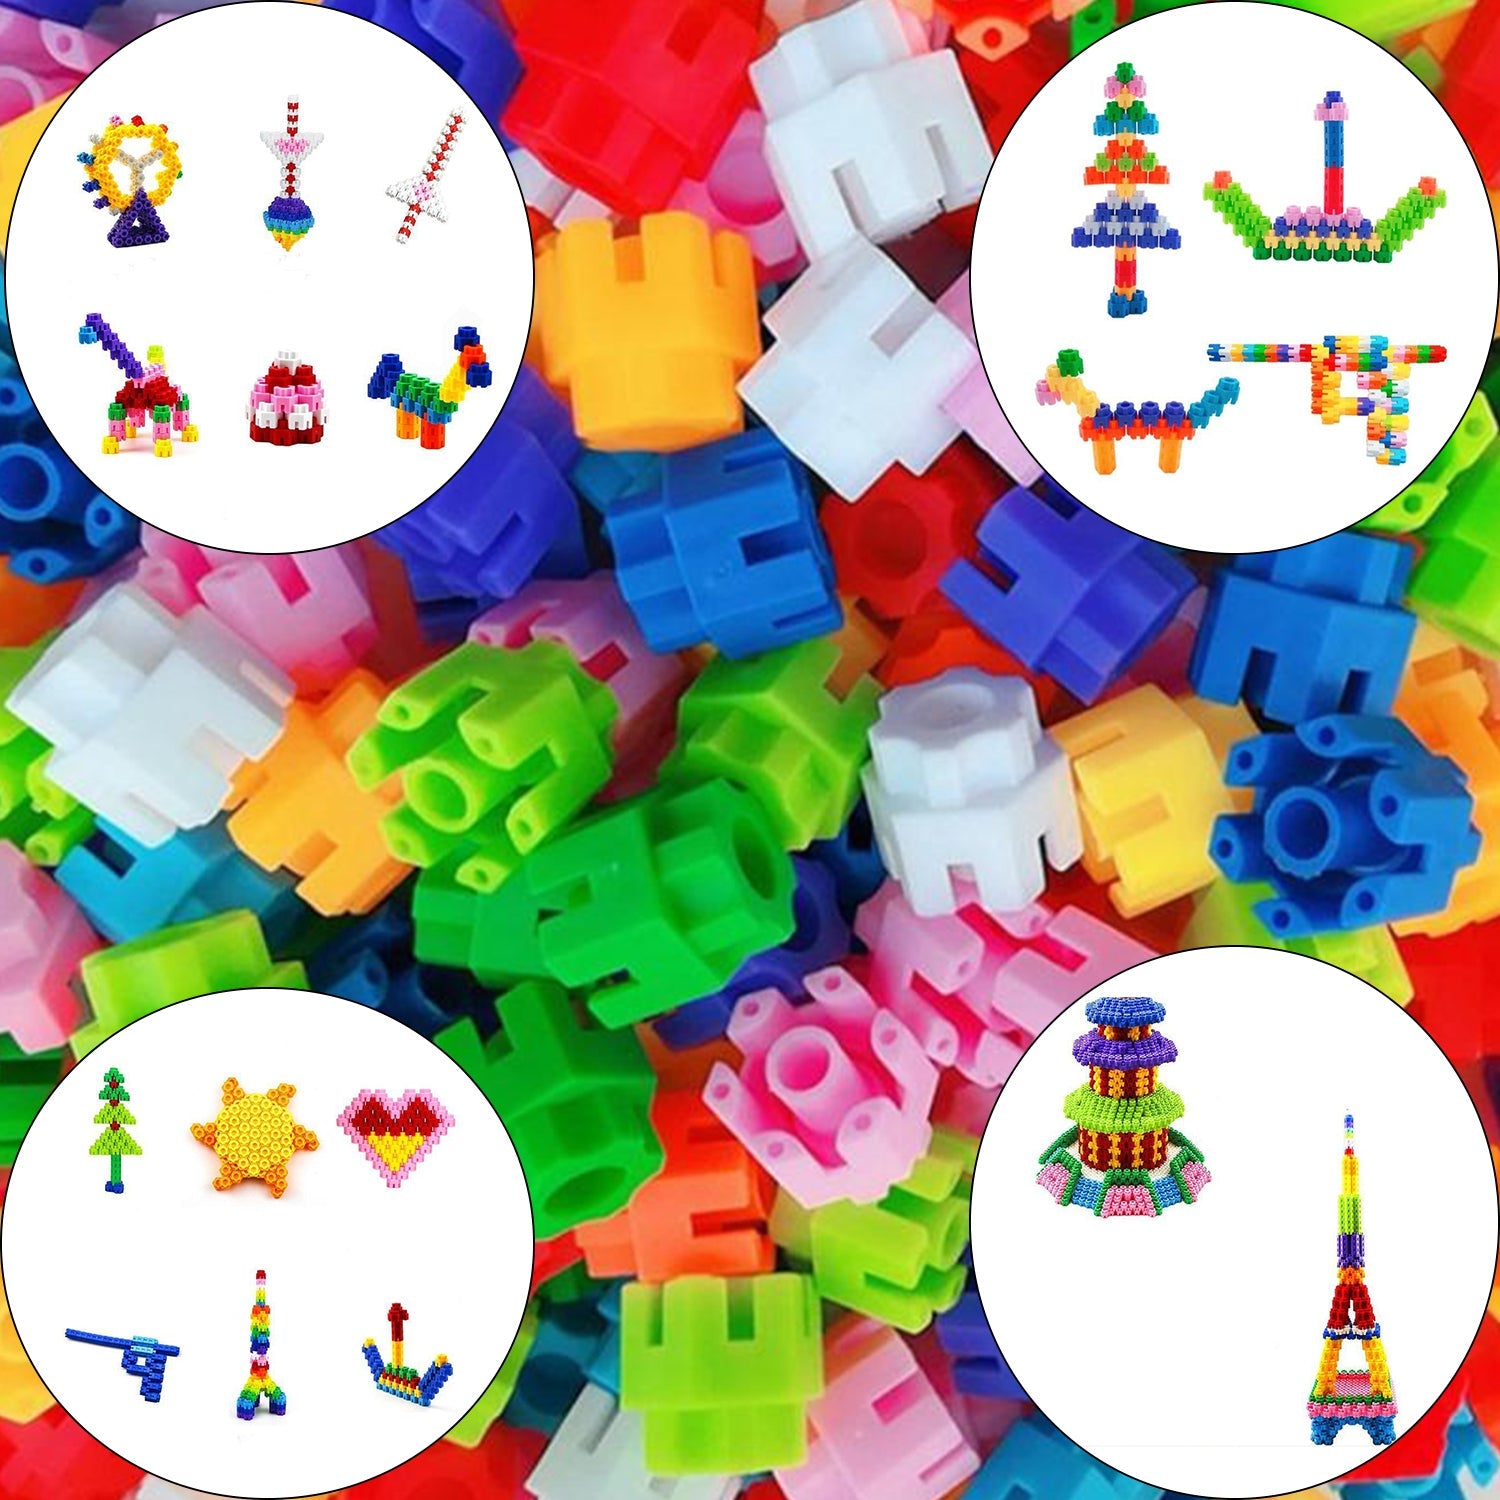 3909 240 Pc Hexa Blocks Toy used in all kinds of household and official places specially for kids and children for their playing and enjoying purposes.